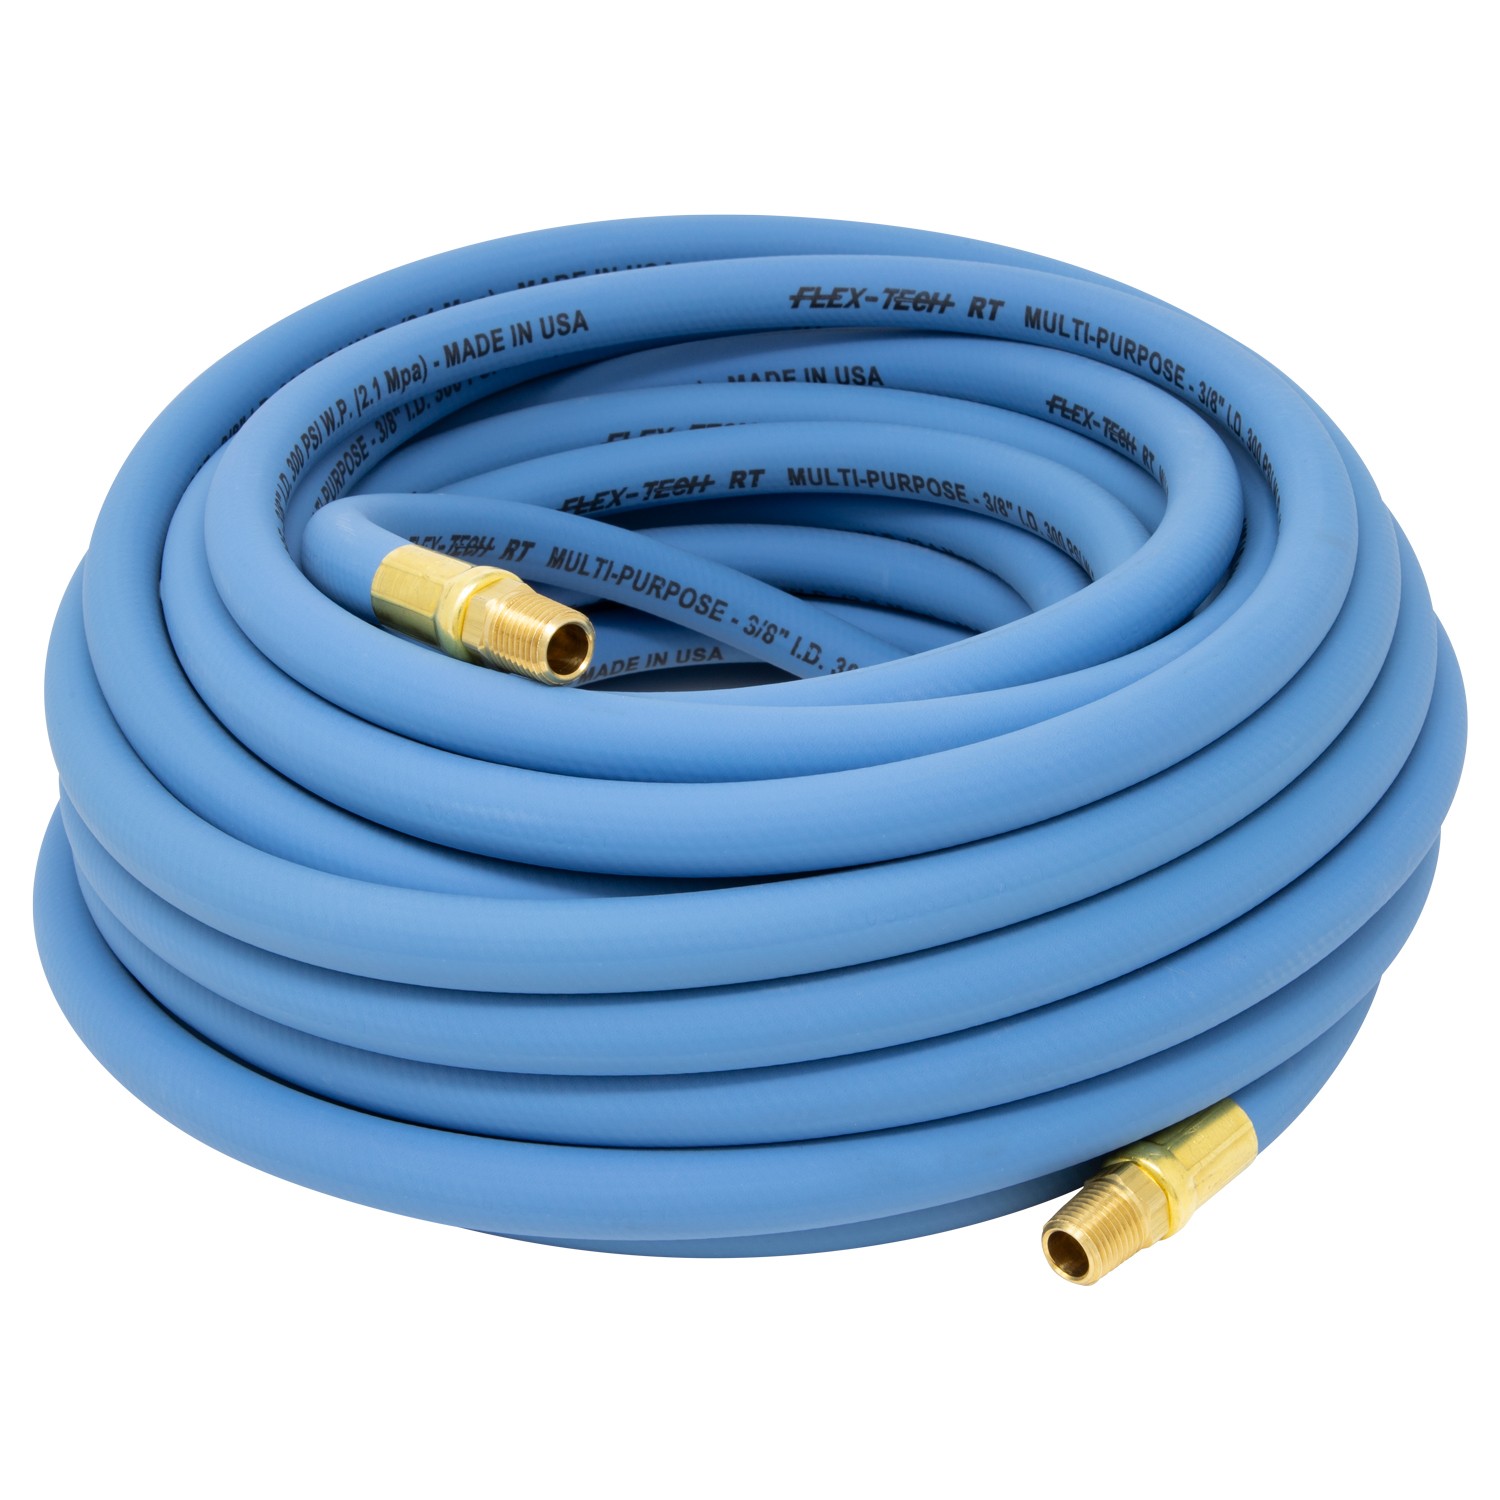 3/8" x 25' Synthetic Rubber Air Hose